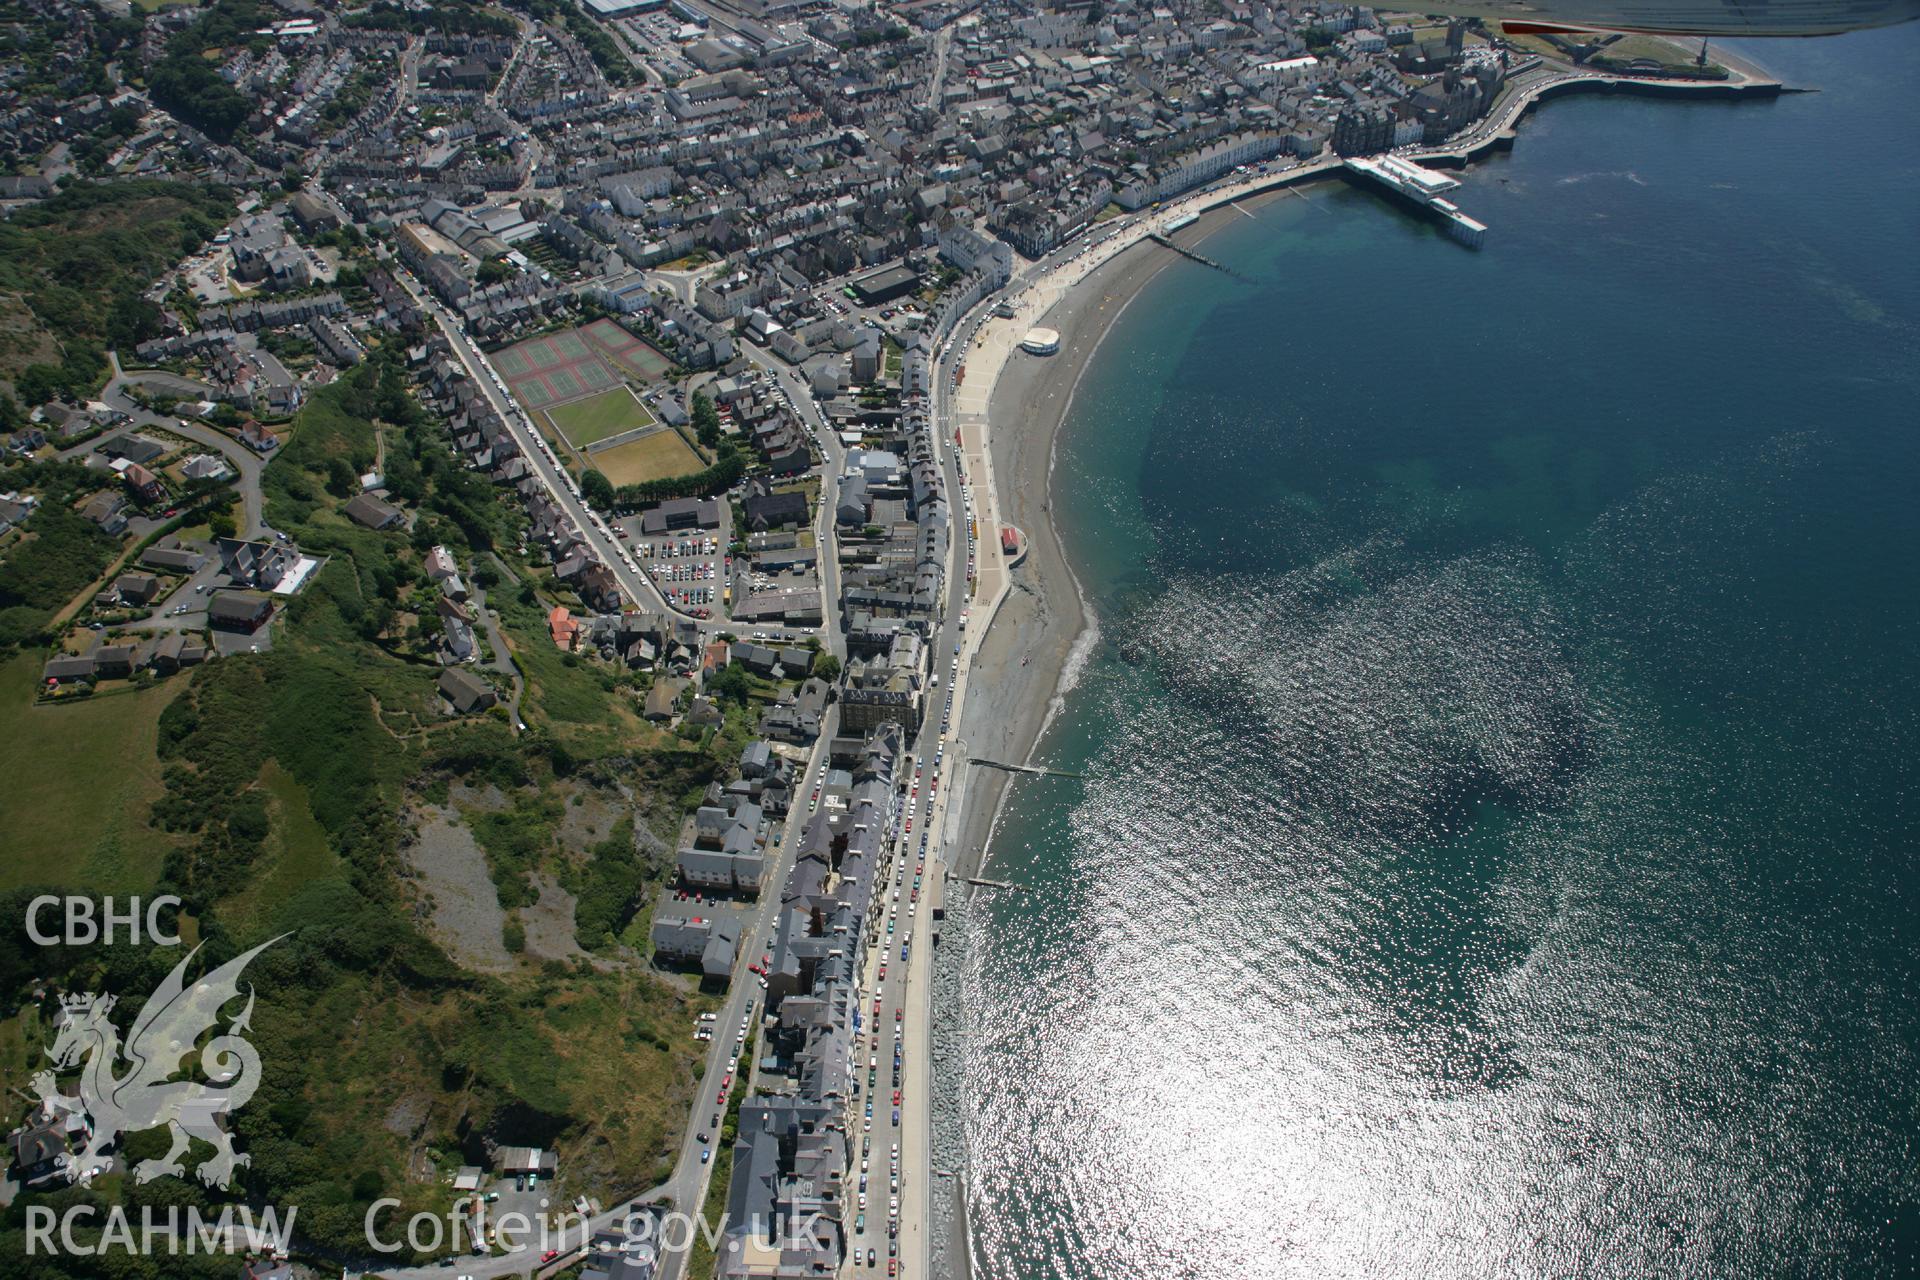 RCAHMW colour oblique aerial photograph of Aberystwyth. Taken on 17 July 2006 by Toby Driver.